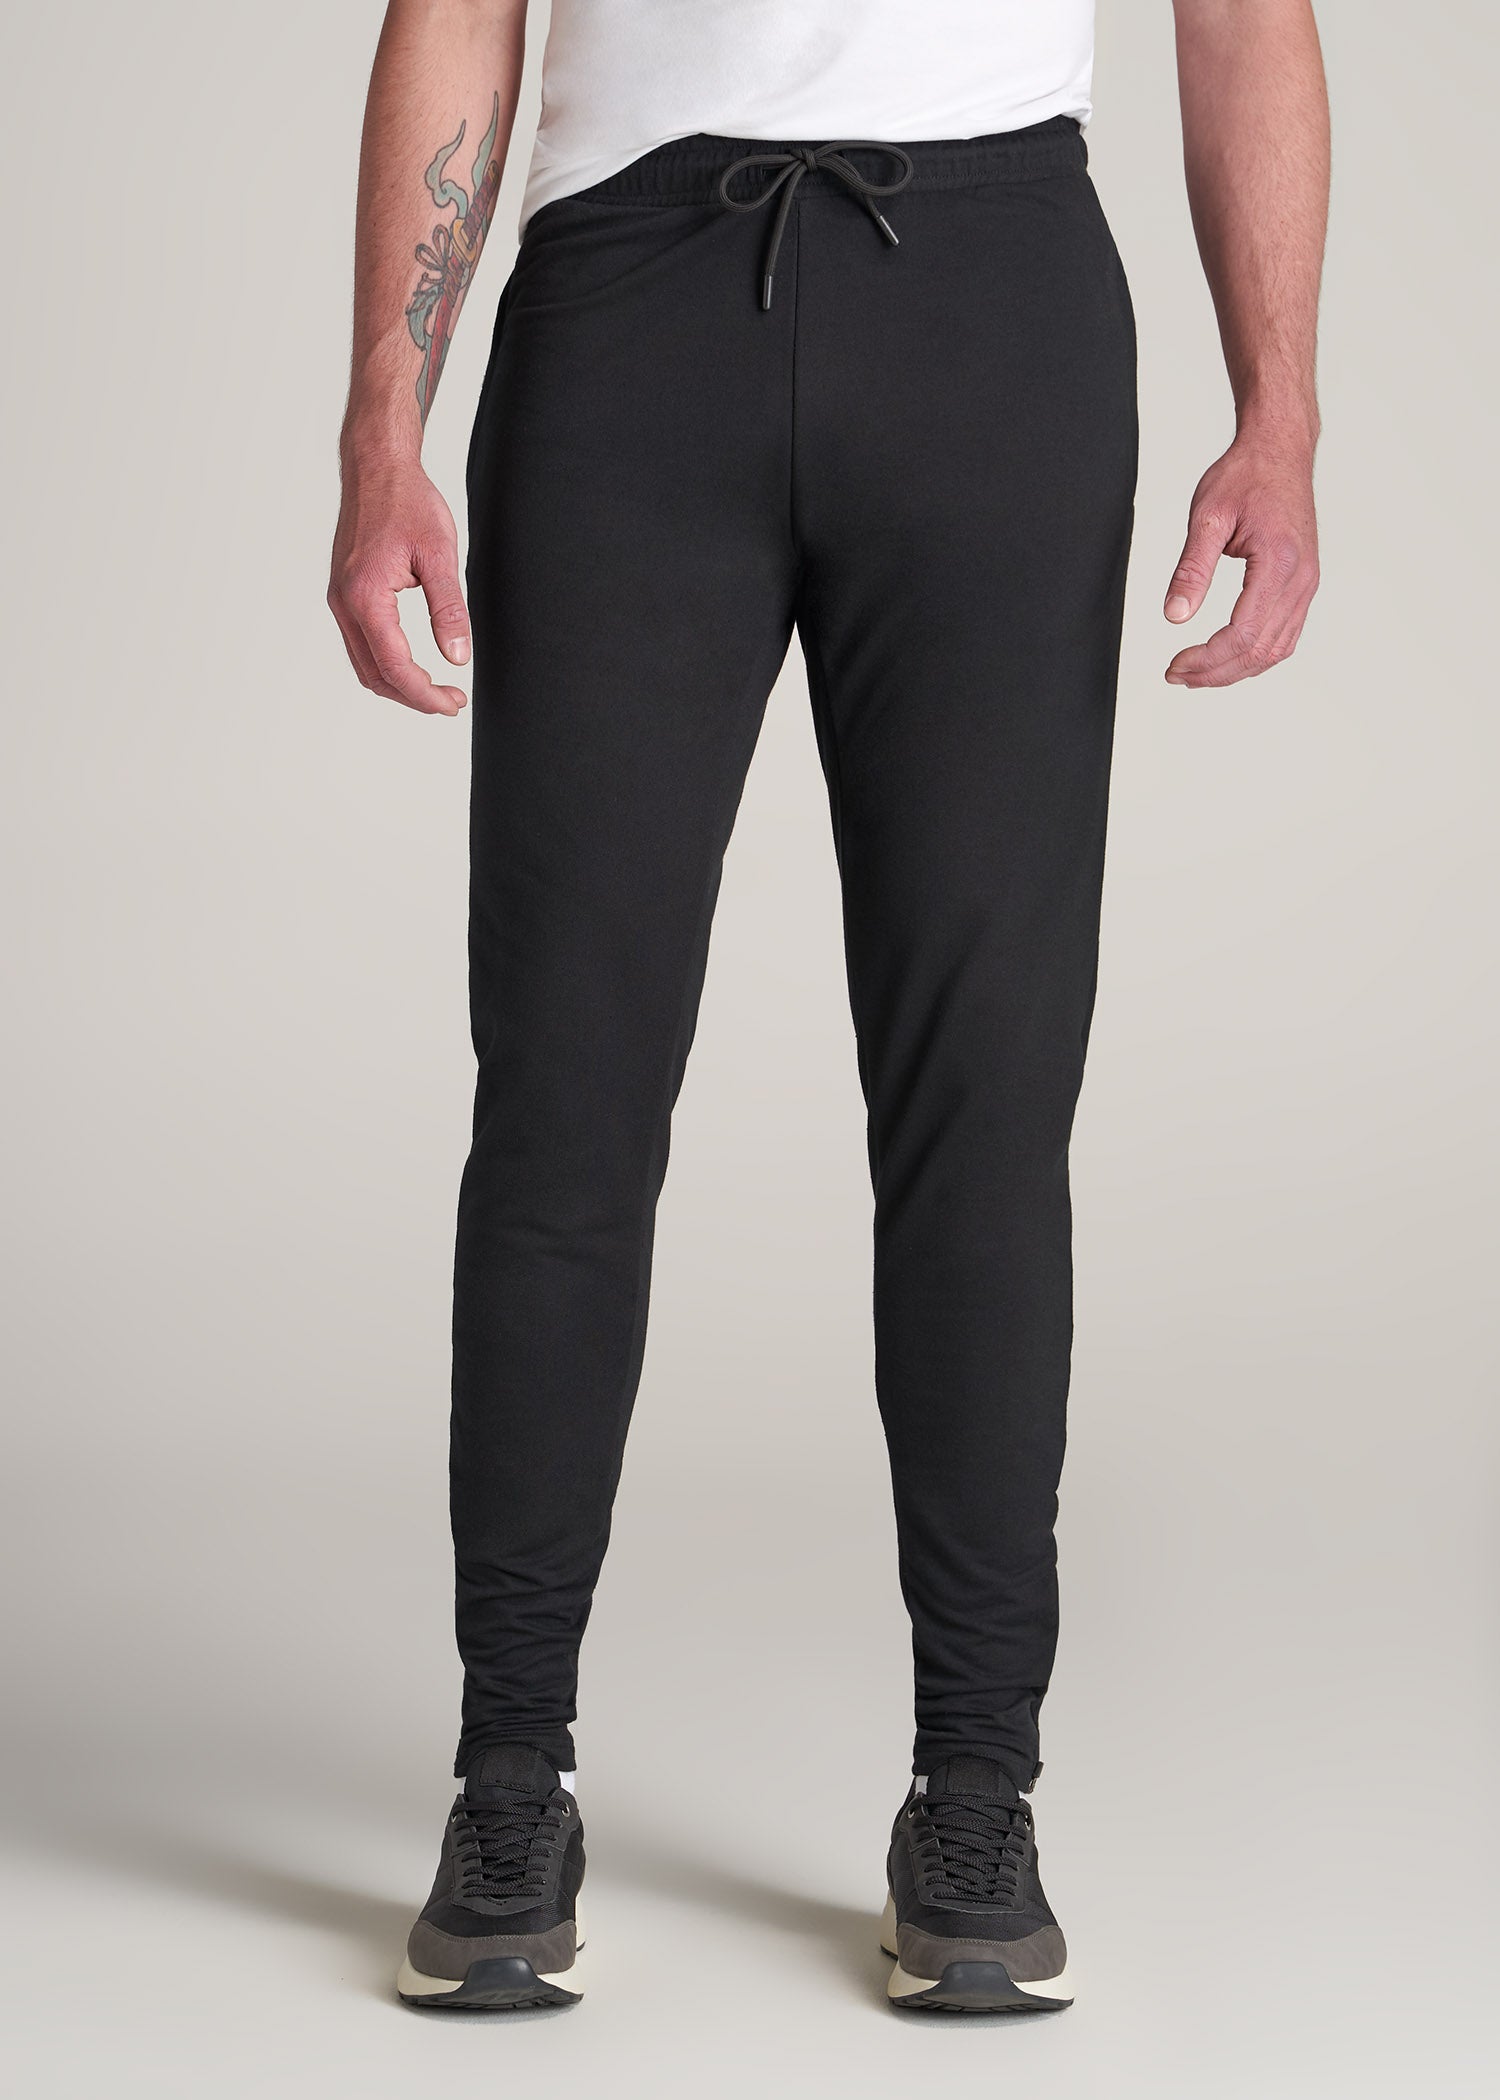 SLIM-FIT Lightweight French Terry Joggers for Tall Men in Black